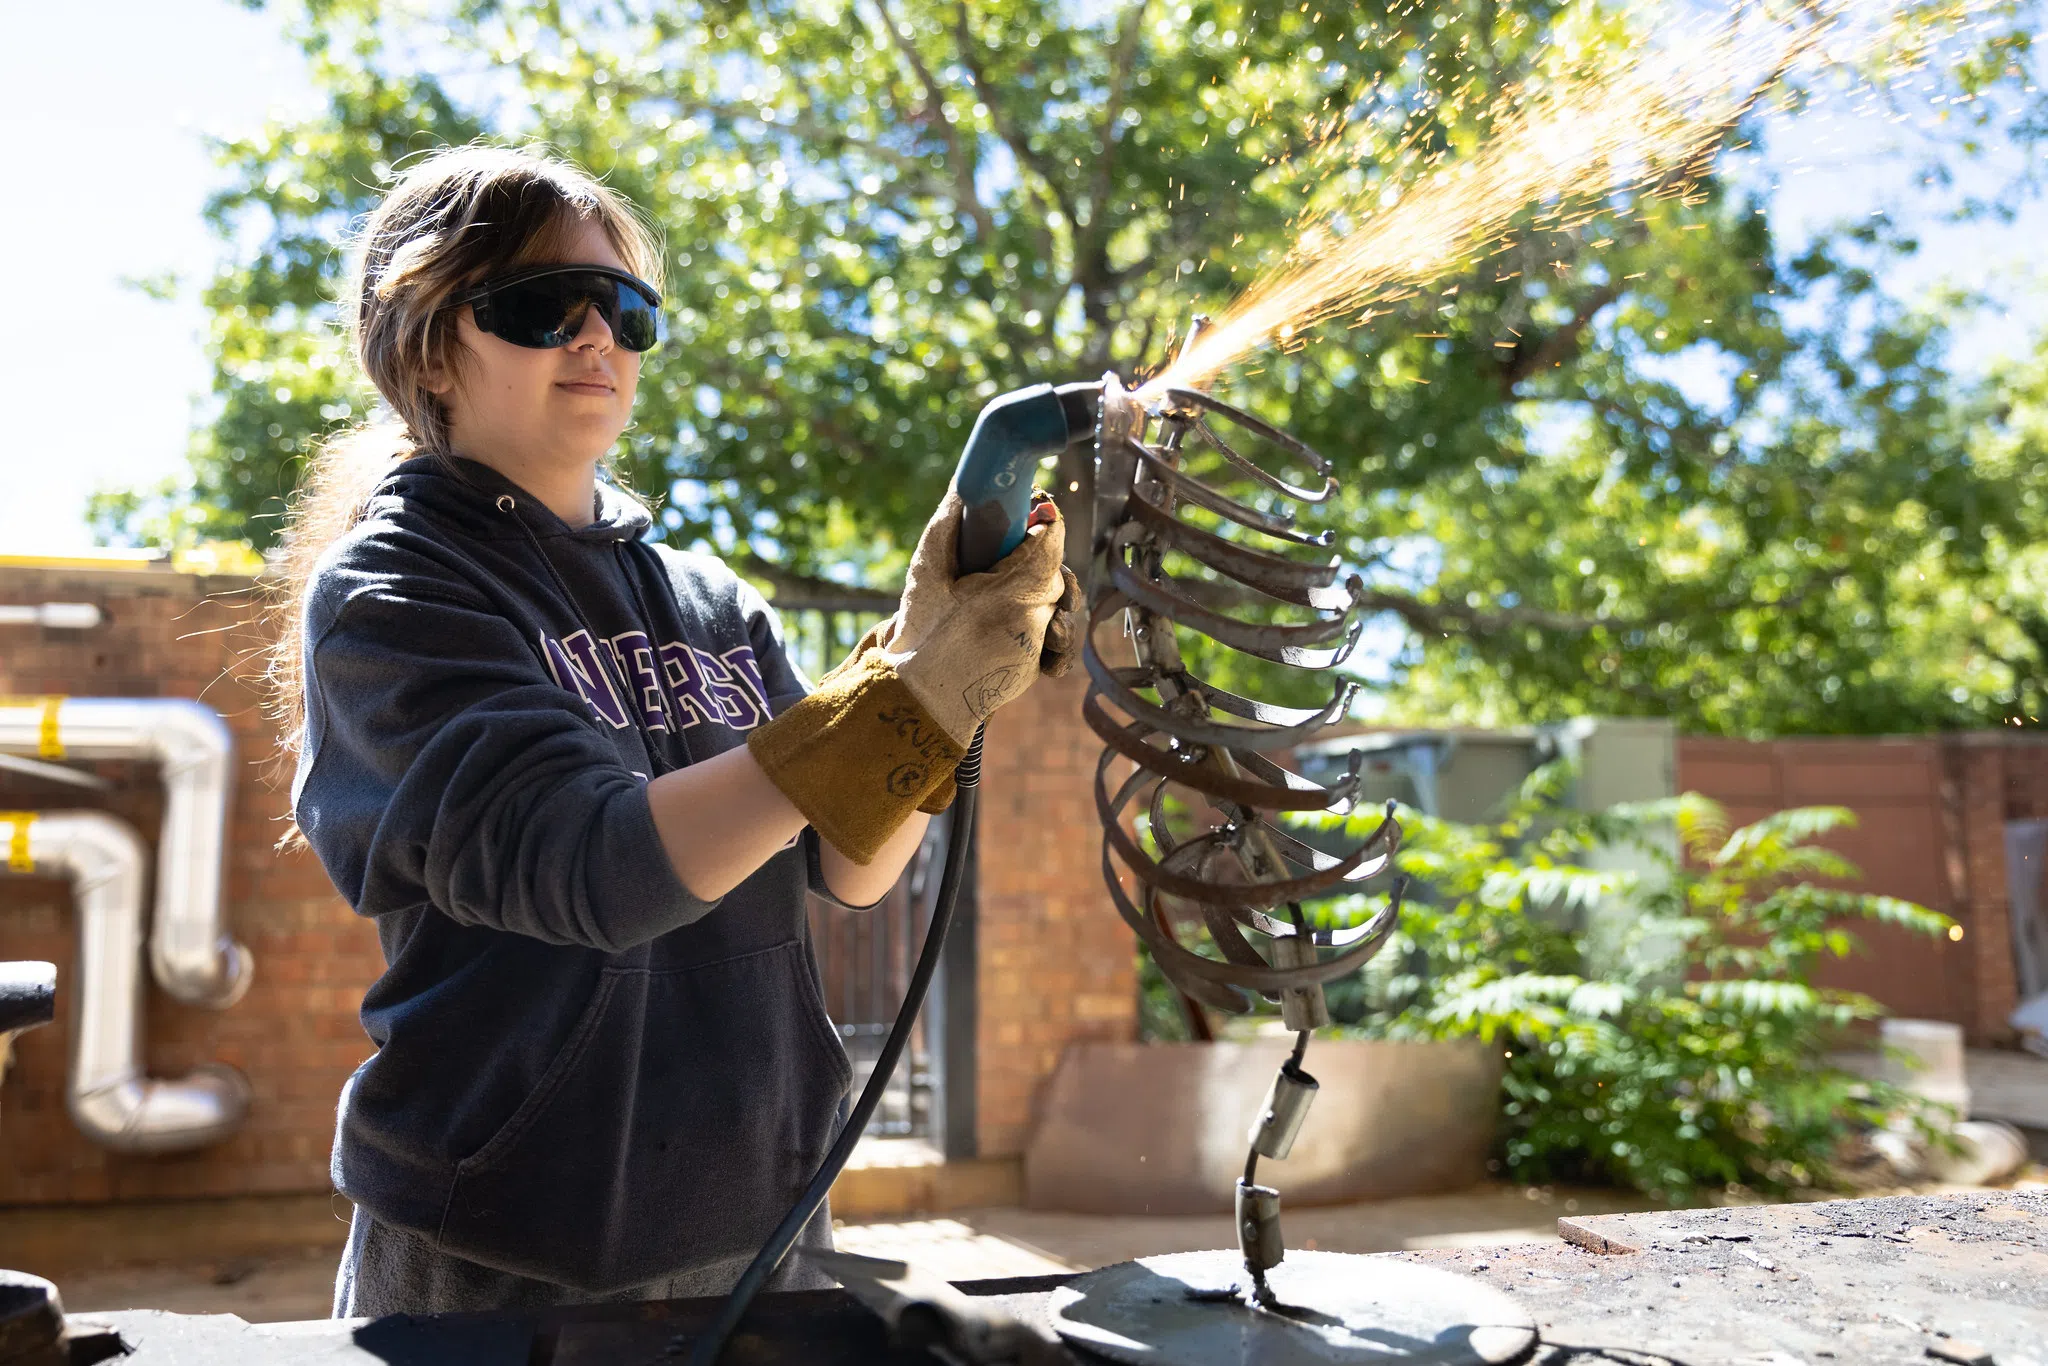 A student wearing safety goggles is outside welding a metal form as sparks shoot from the welding tool.